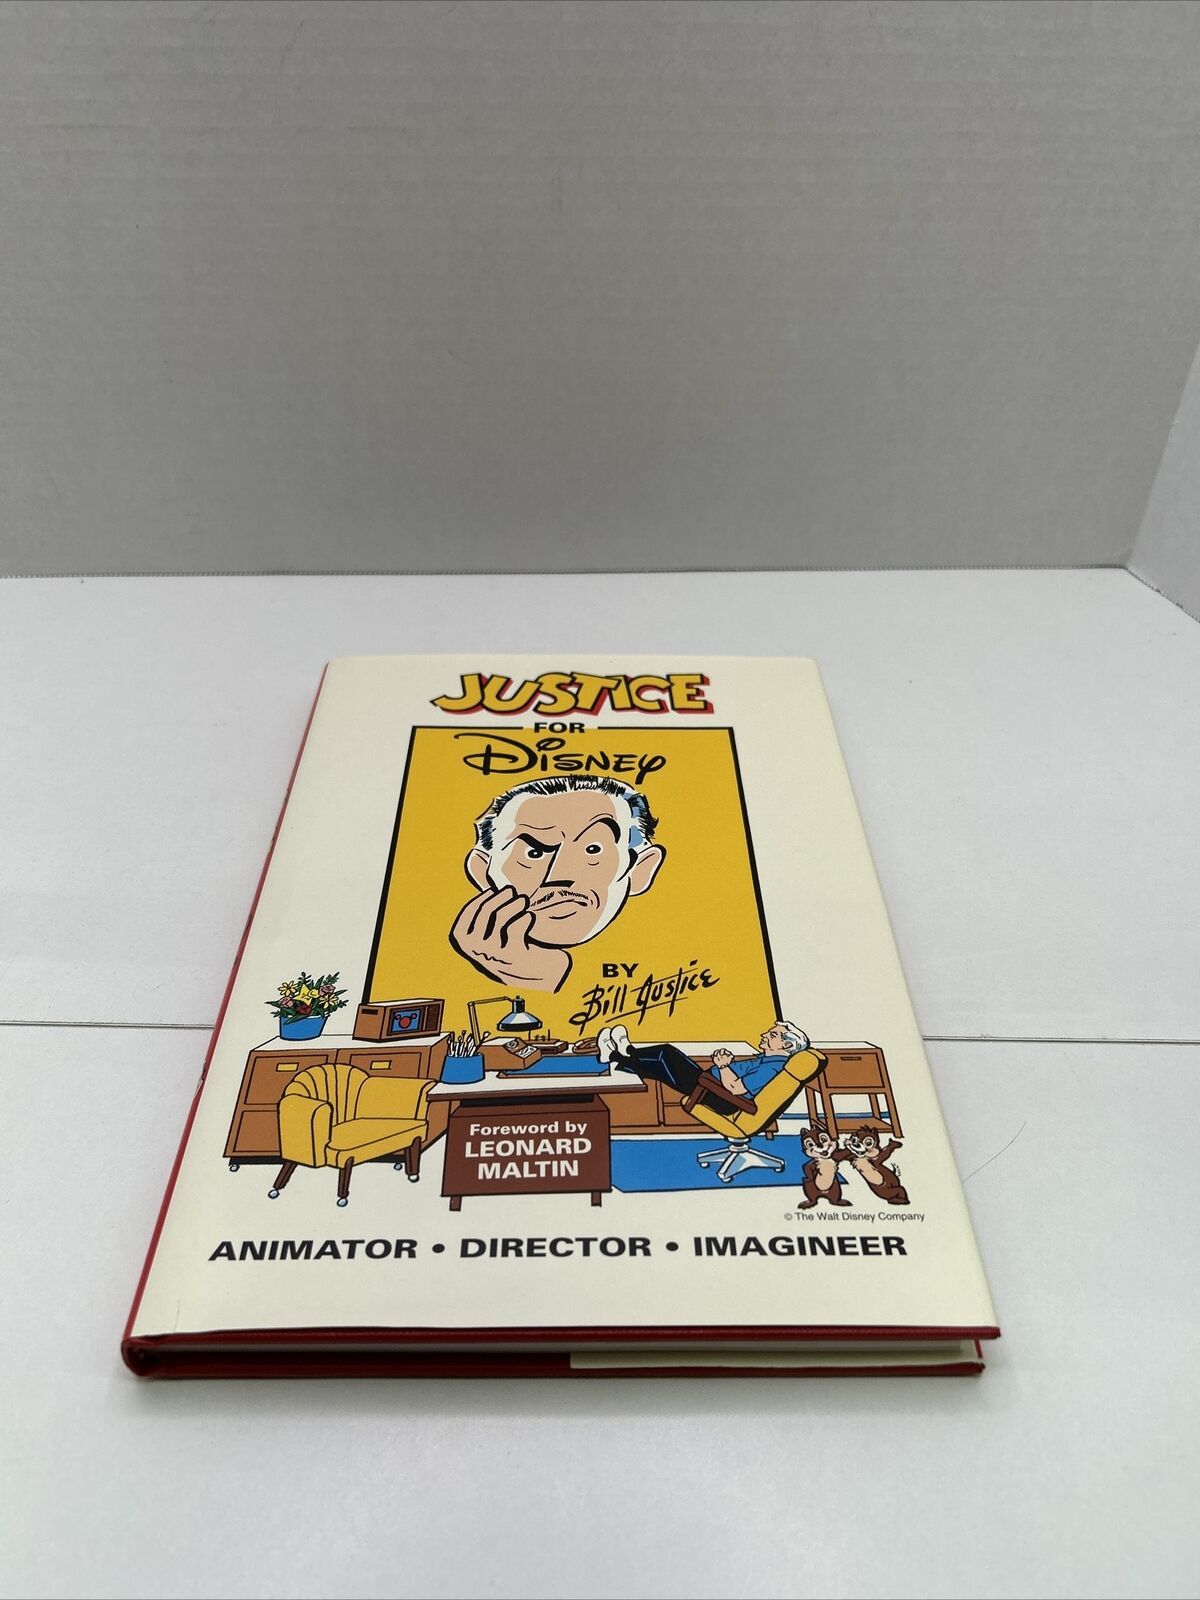 JUSTICE FOR DISNEY by Bill Justice HC SIGNED AUTOGRAPHED * LE 352 Of 1000